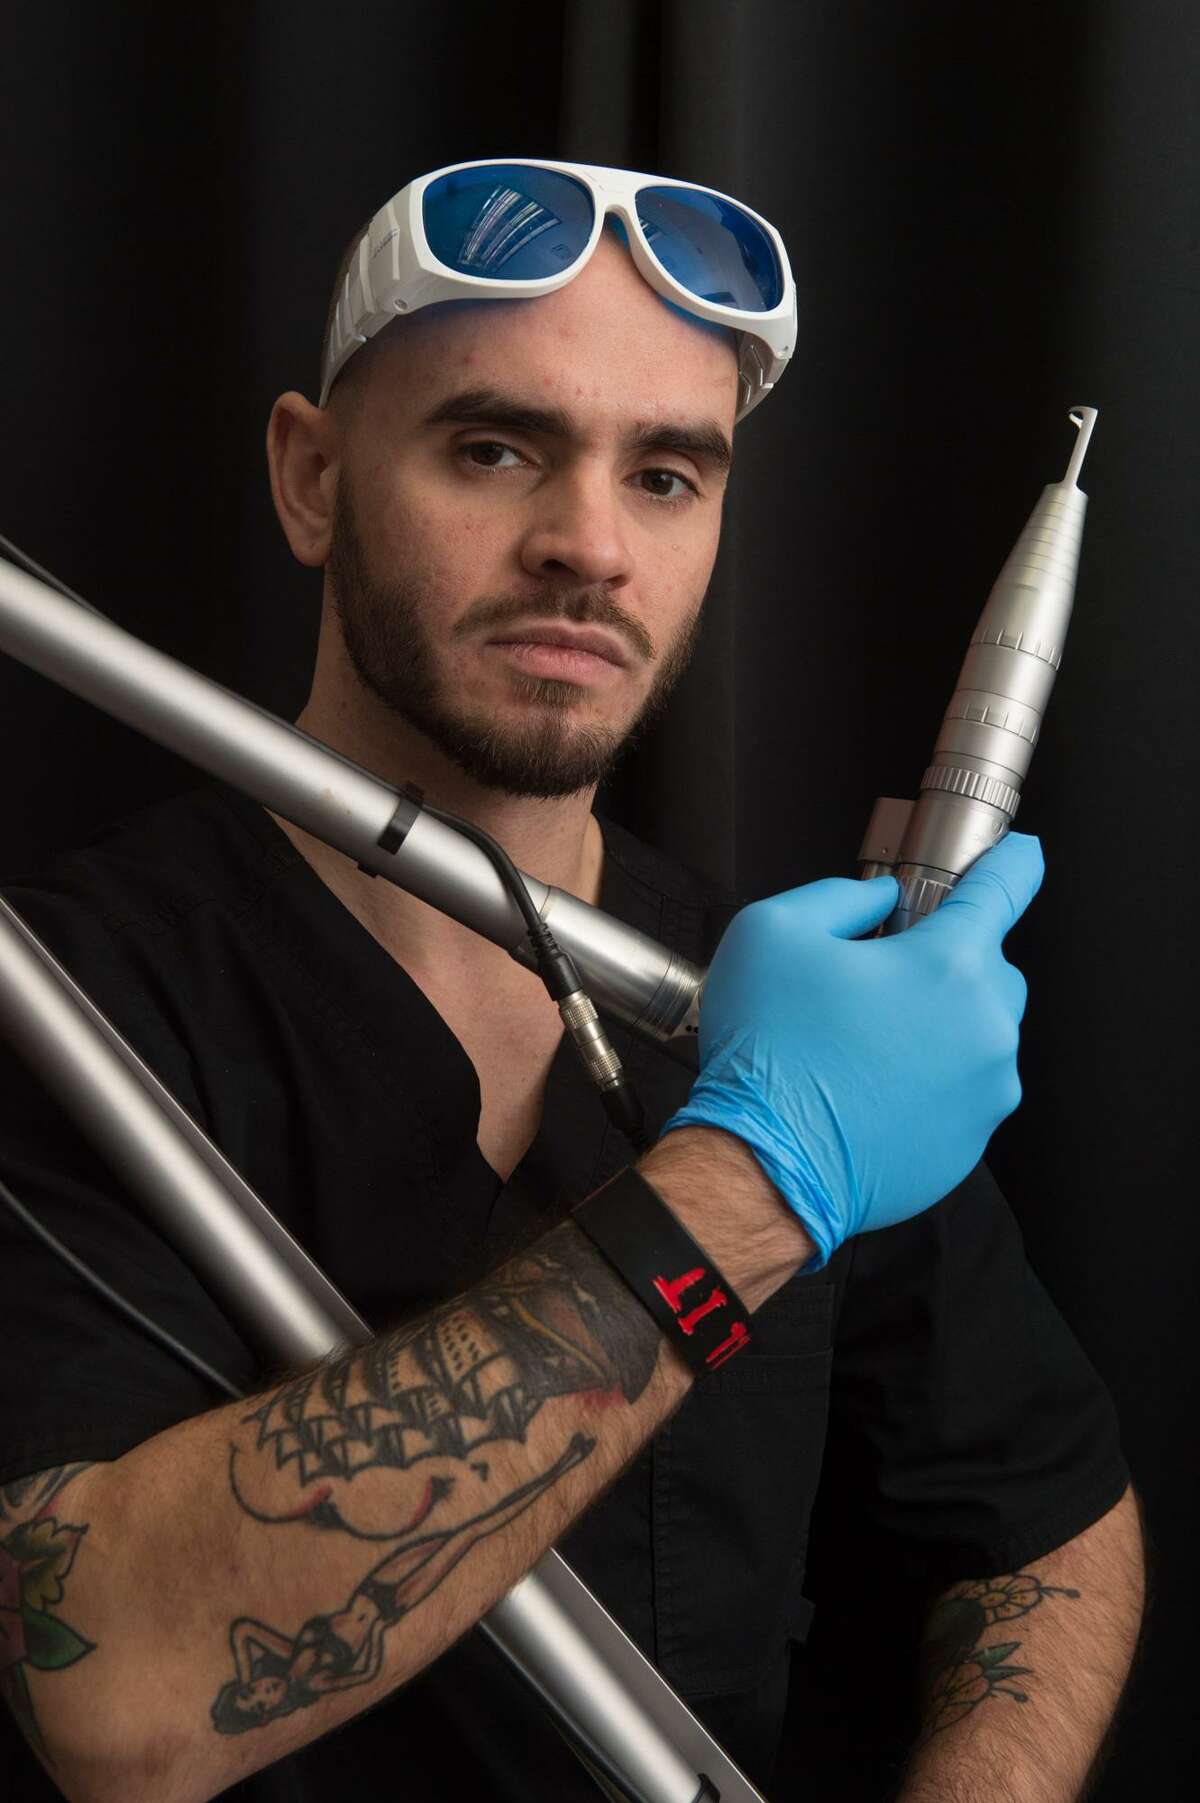 Zack Wells, a certified laser specialists at the MEDermis Laser Clinic, poses with one of the lasers he uses to remove no-longer-loved tattoos.